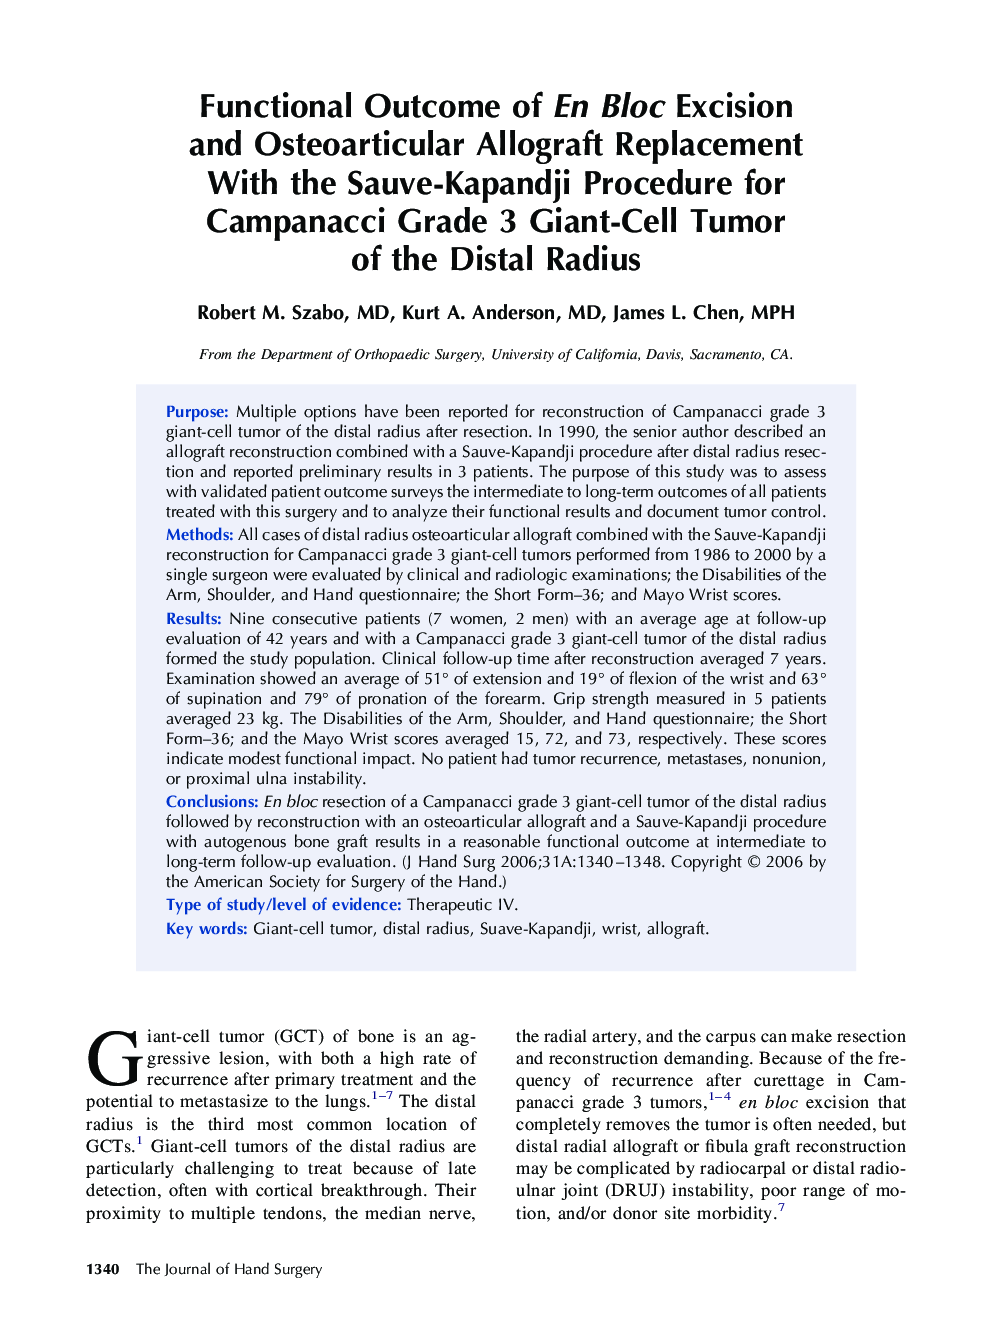 Functional Outcome of En Bloc Excision and Osteoarticular Allograft Replacement With the Sauve-Kapandji Procedure for Campanacci Grade 3 Giant-Cell Tumor of the Distal Radius 